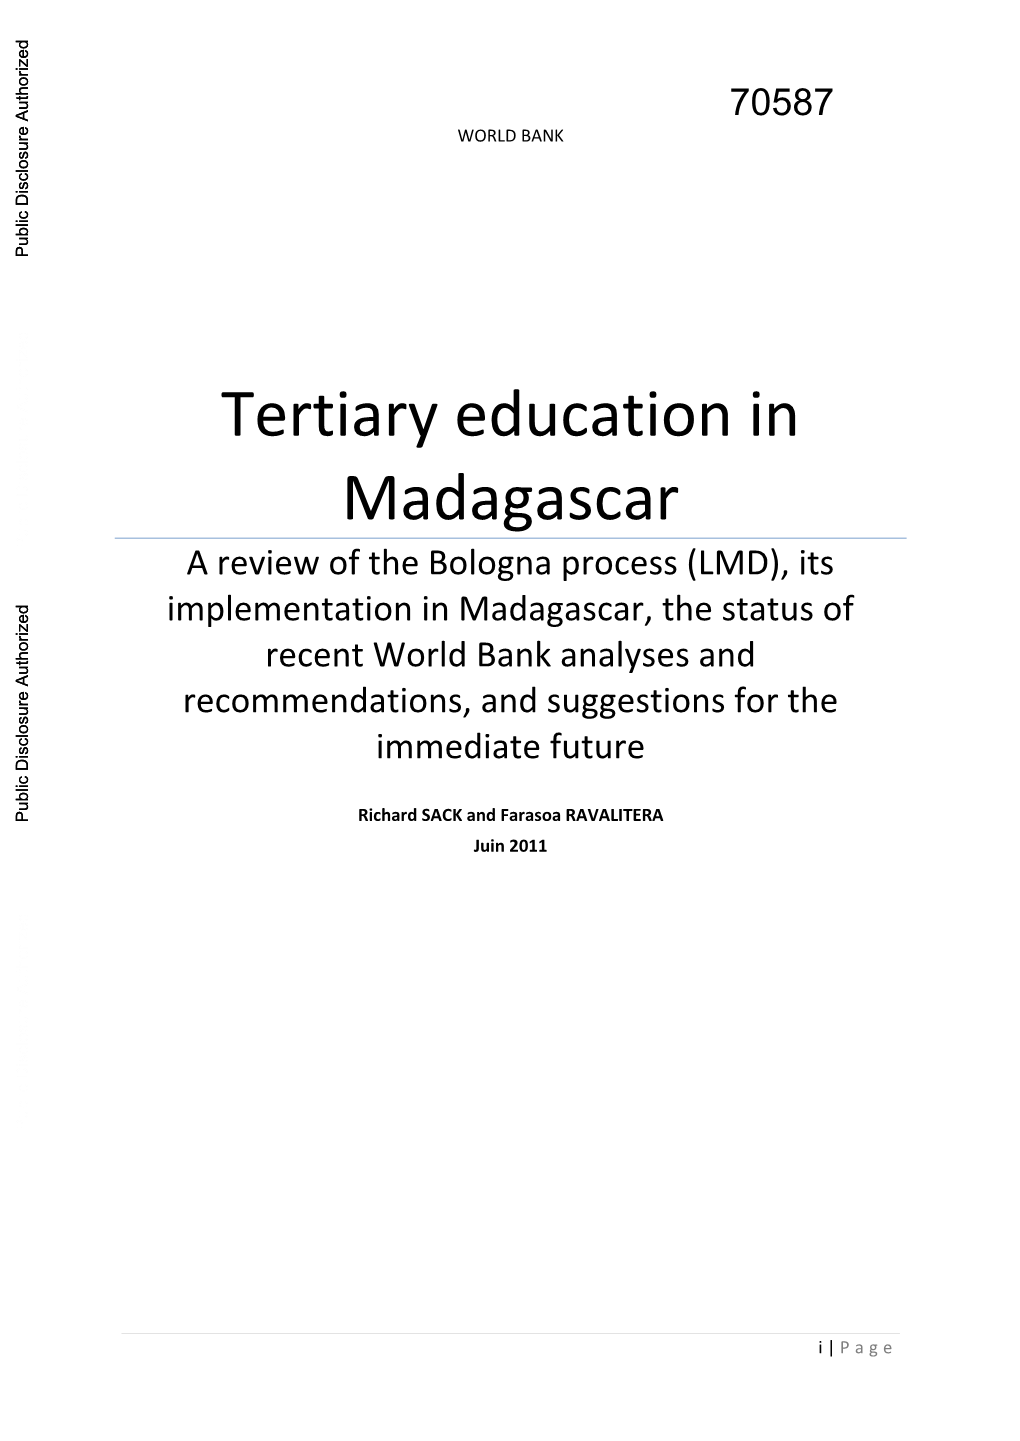 III. Tertiary Education in Madagascar: Review of Previous Studies